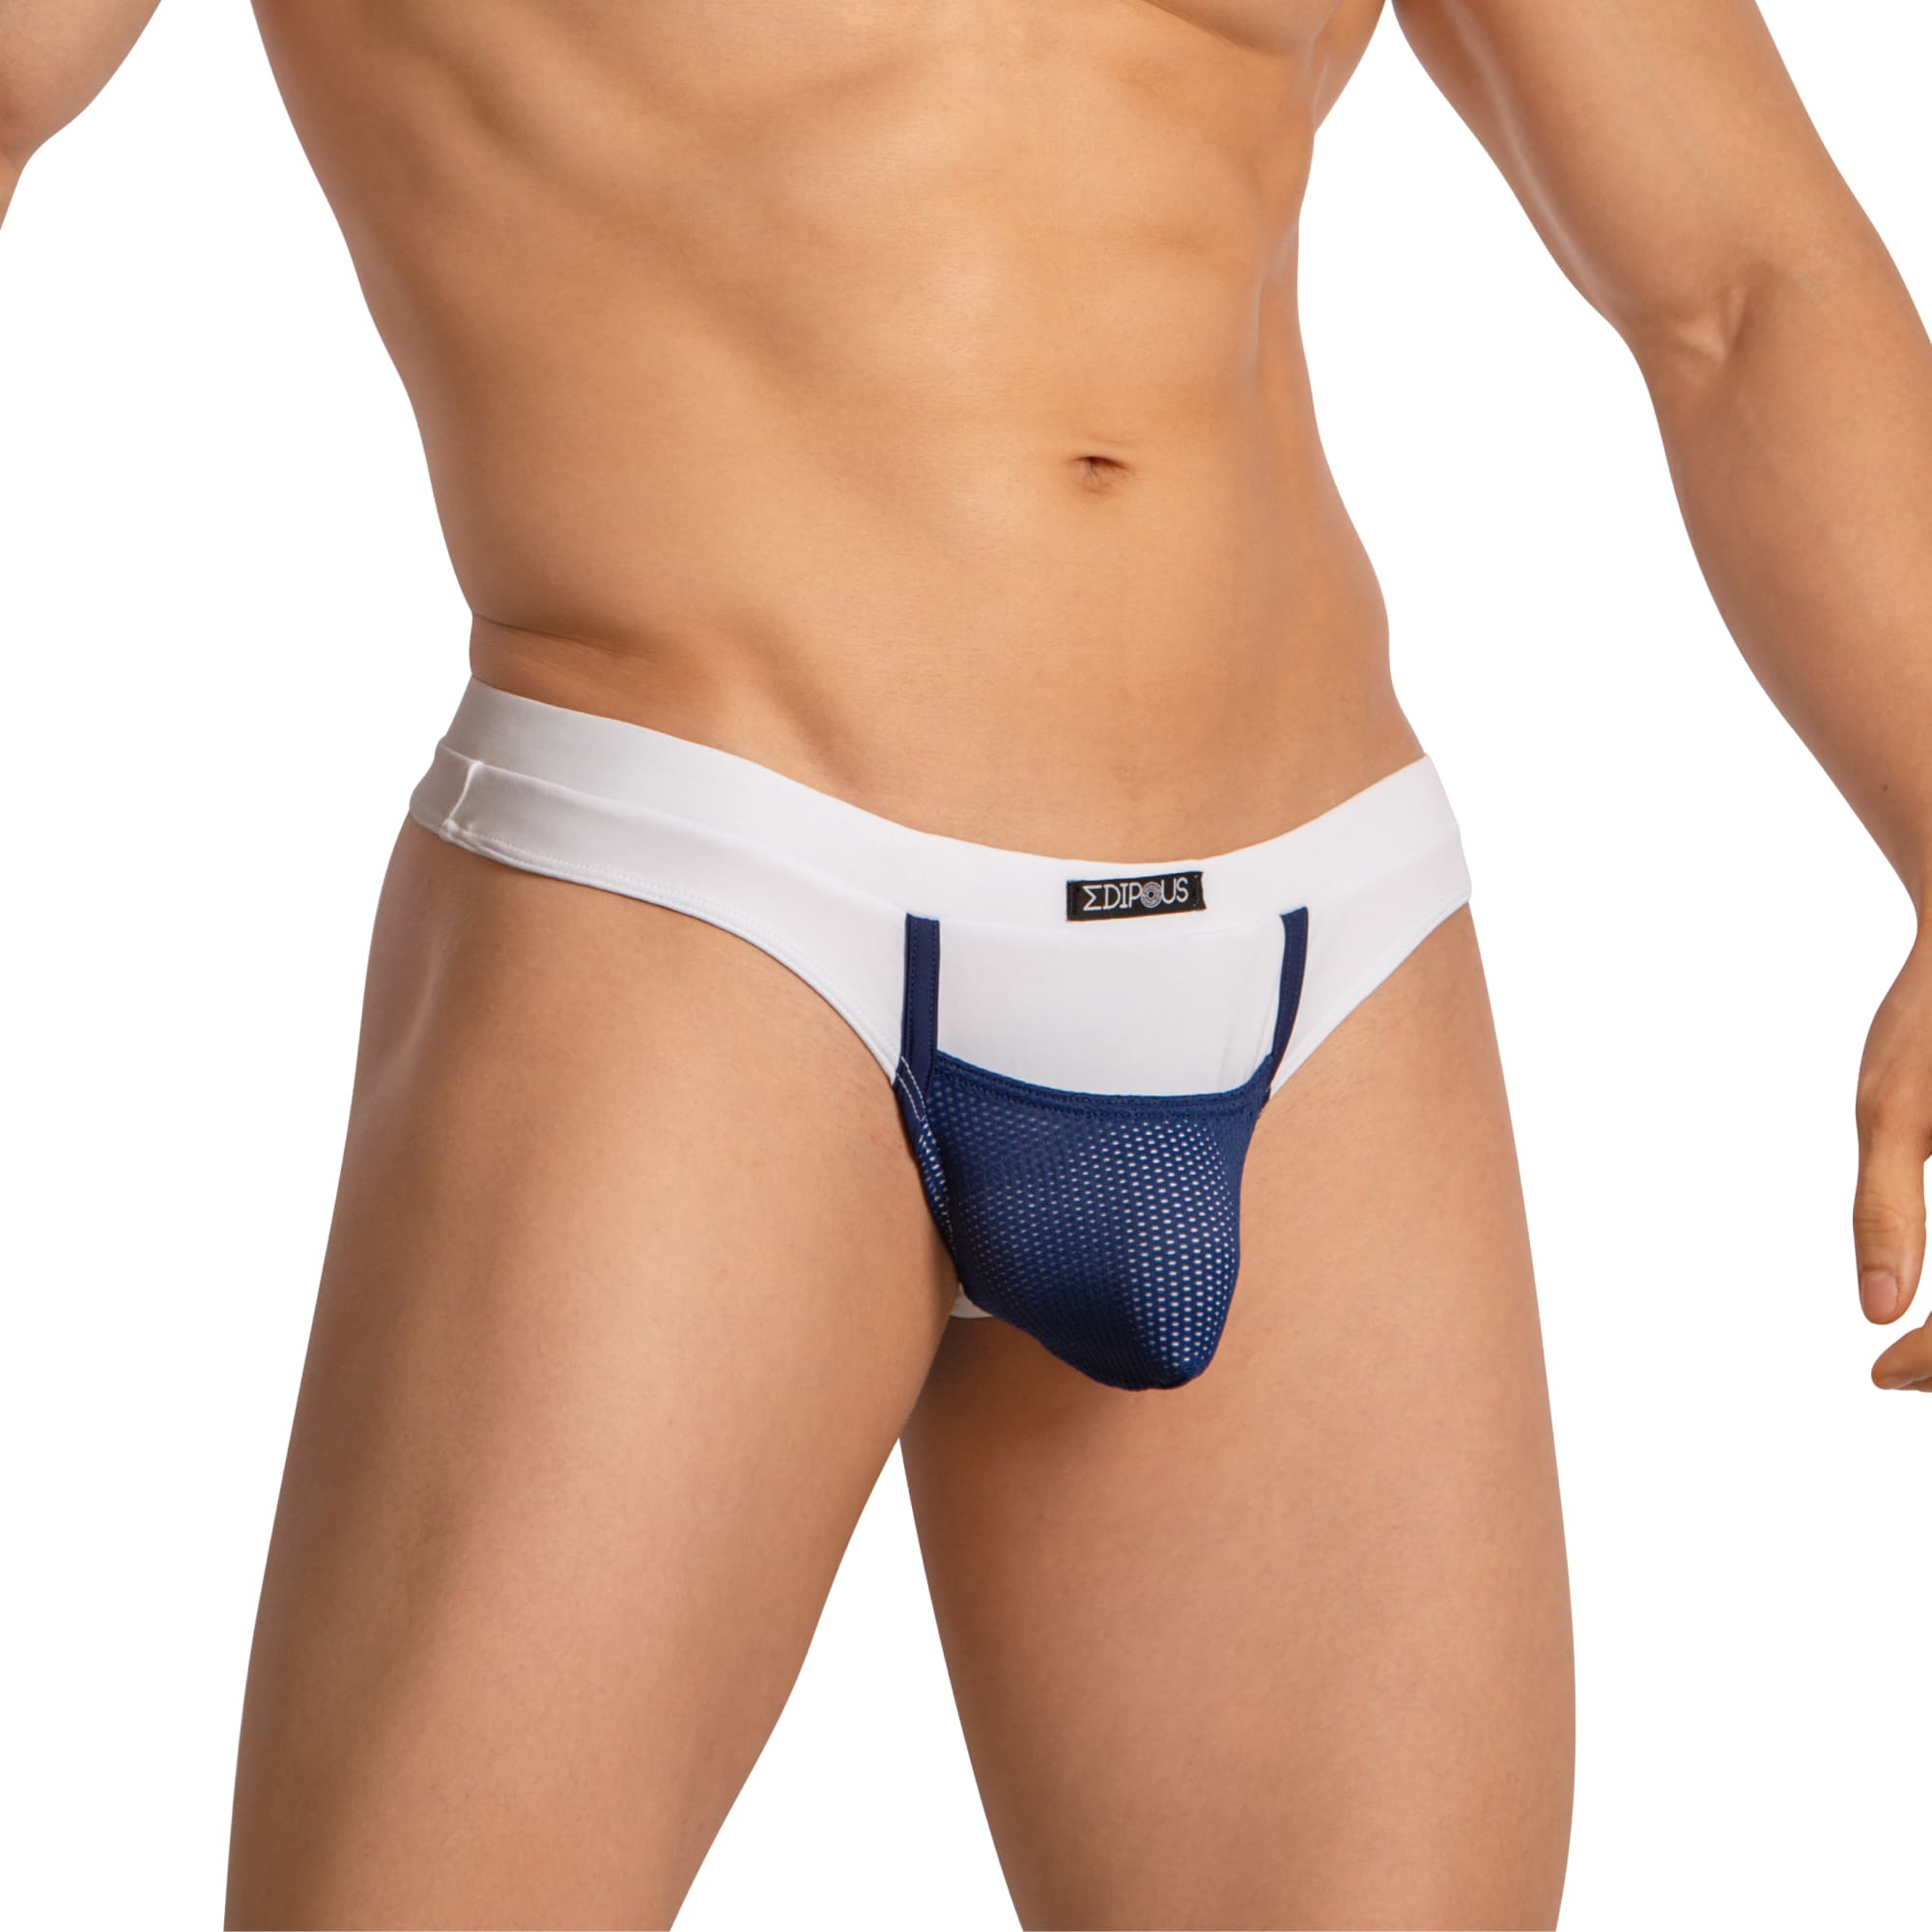 Edipous Sexy and Classic Mesh Men's Thong EDK024